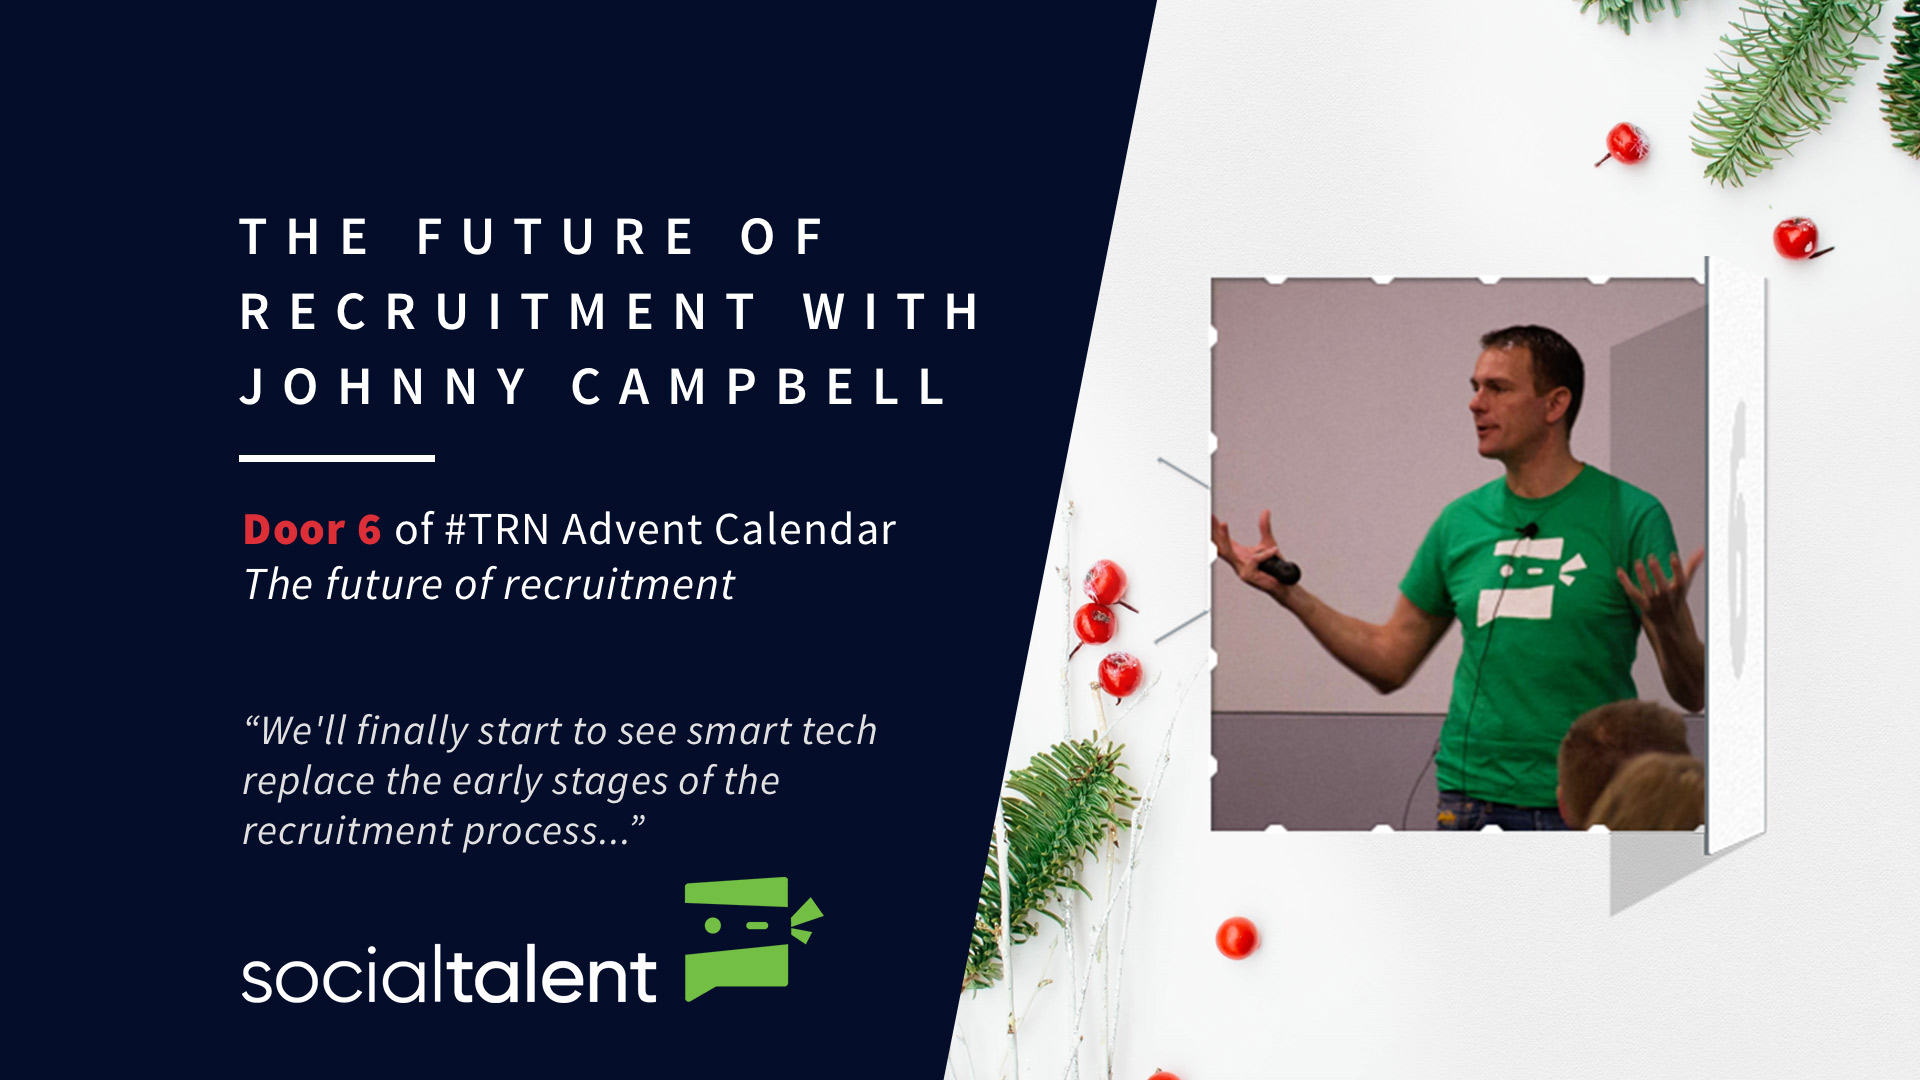 The Future of Recruitment with Johnny Campbell